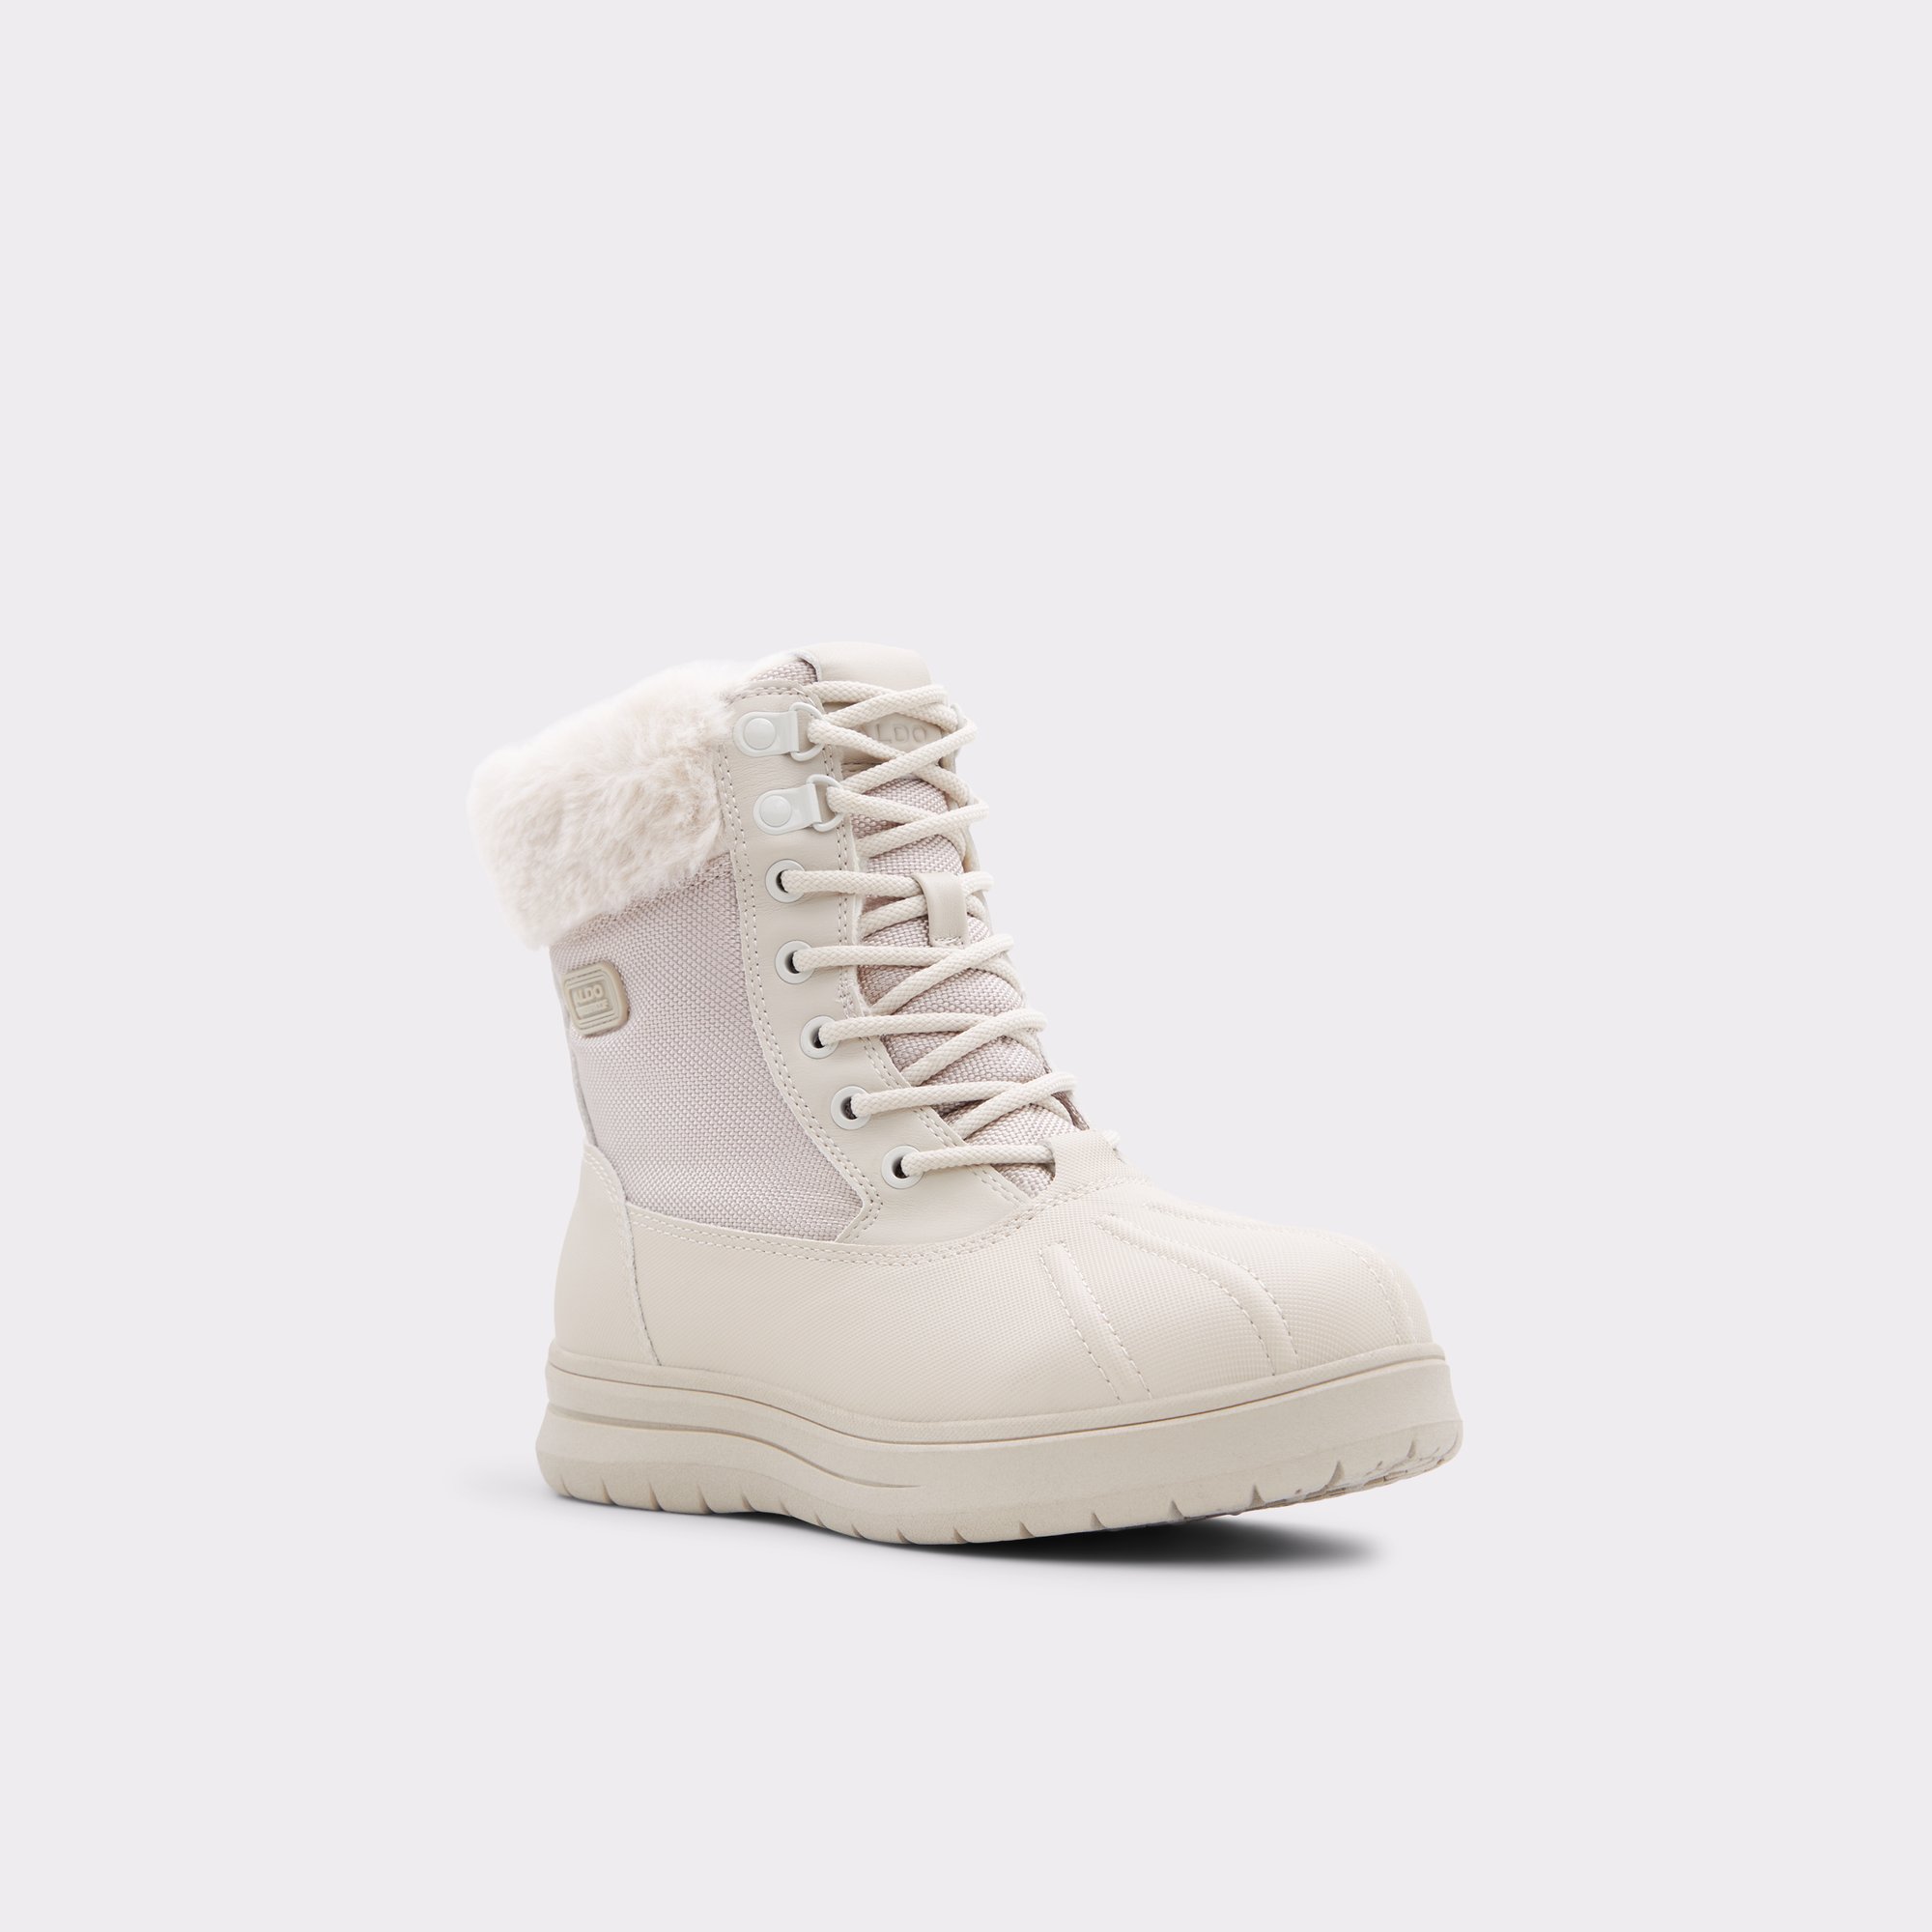 Hovedkvarter sanger arabisk Flurrys Ice Synthetic Mixed Material Women's Winter boots | ALDO Canada